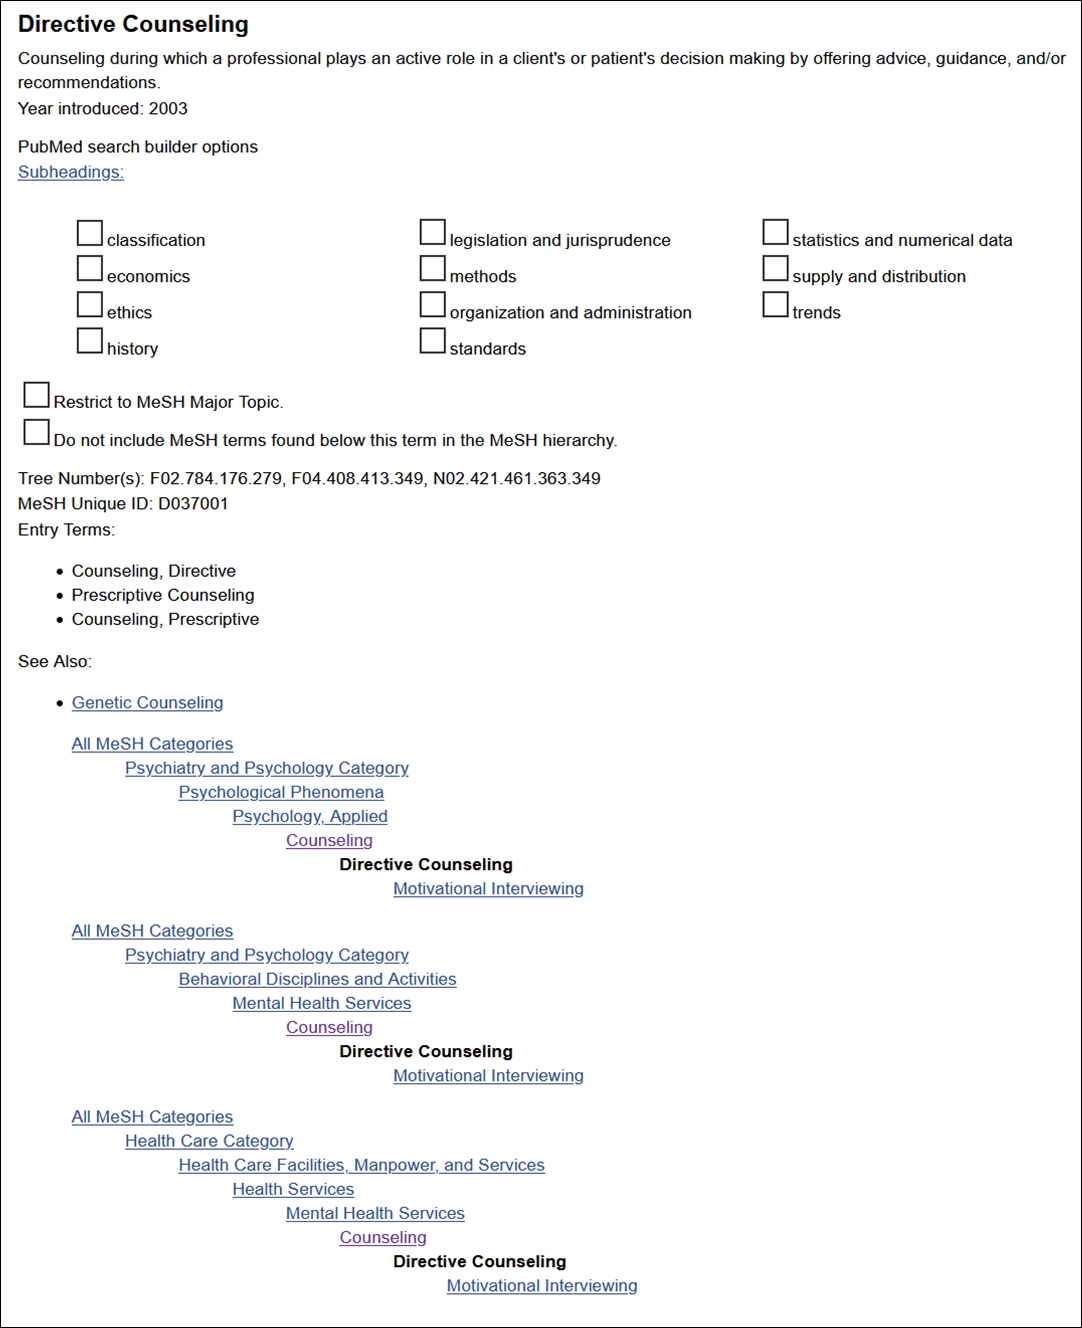 Image of MeSH Database Description for Directive Counseling